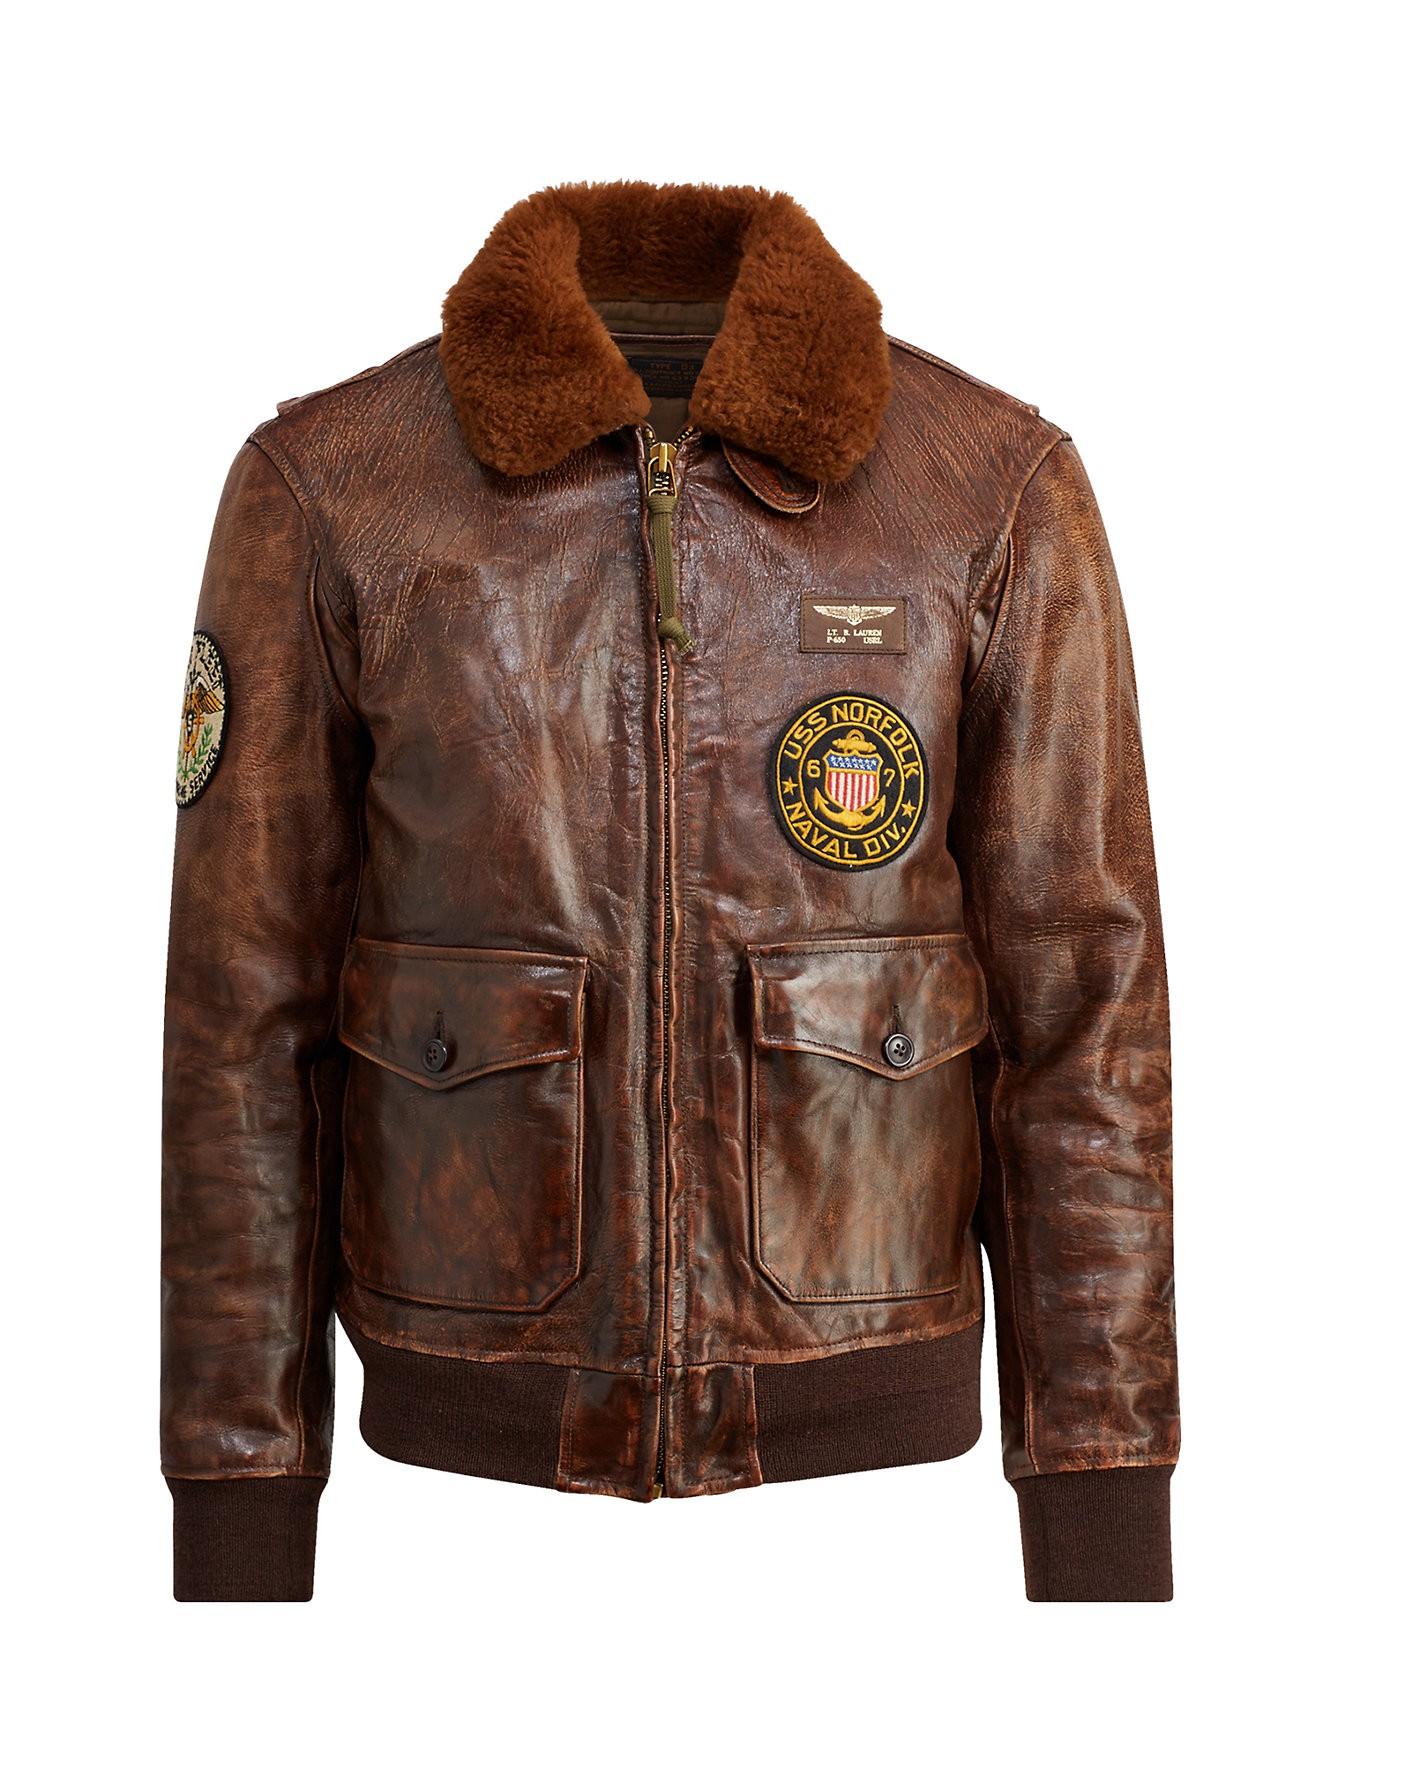 Ralph Lauren Polo The Iconic G-1 Bomber Jacket In Bison Brown | ModeSens